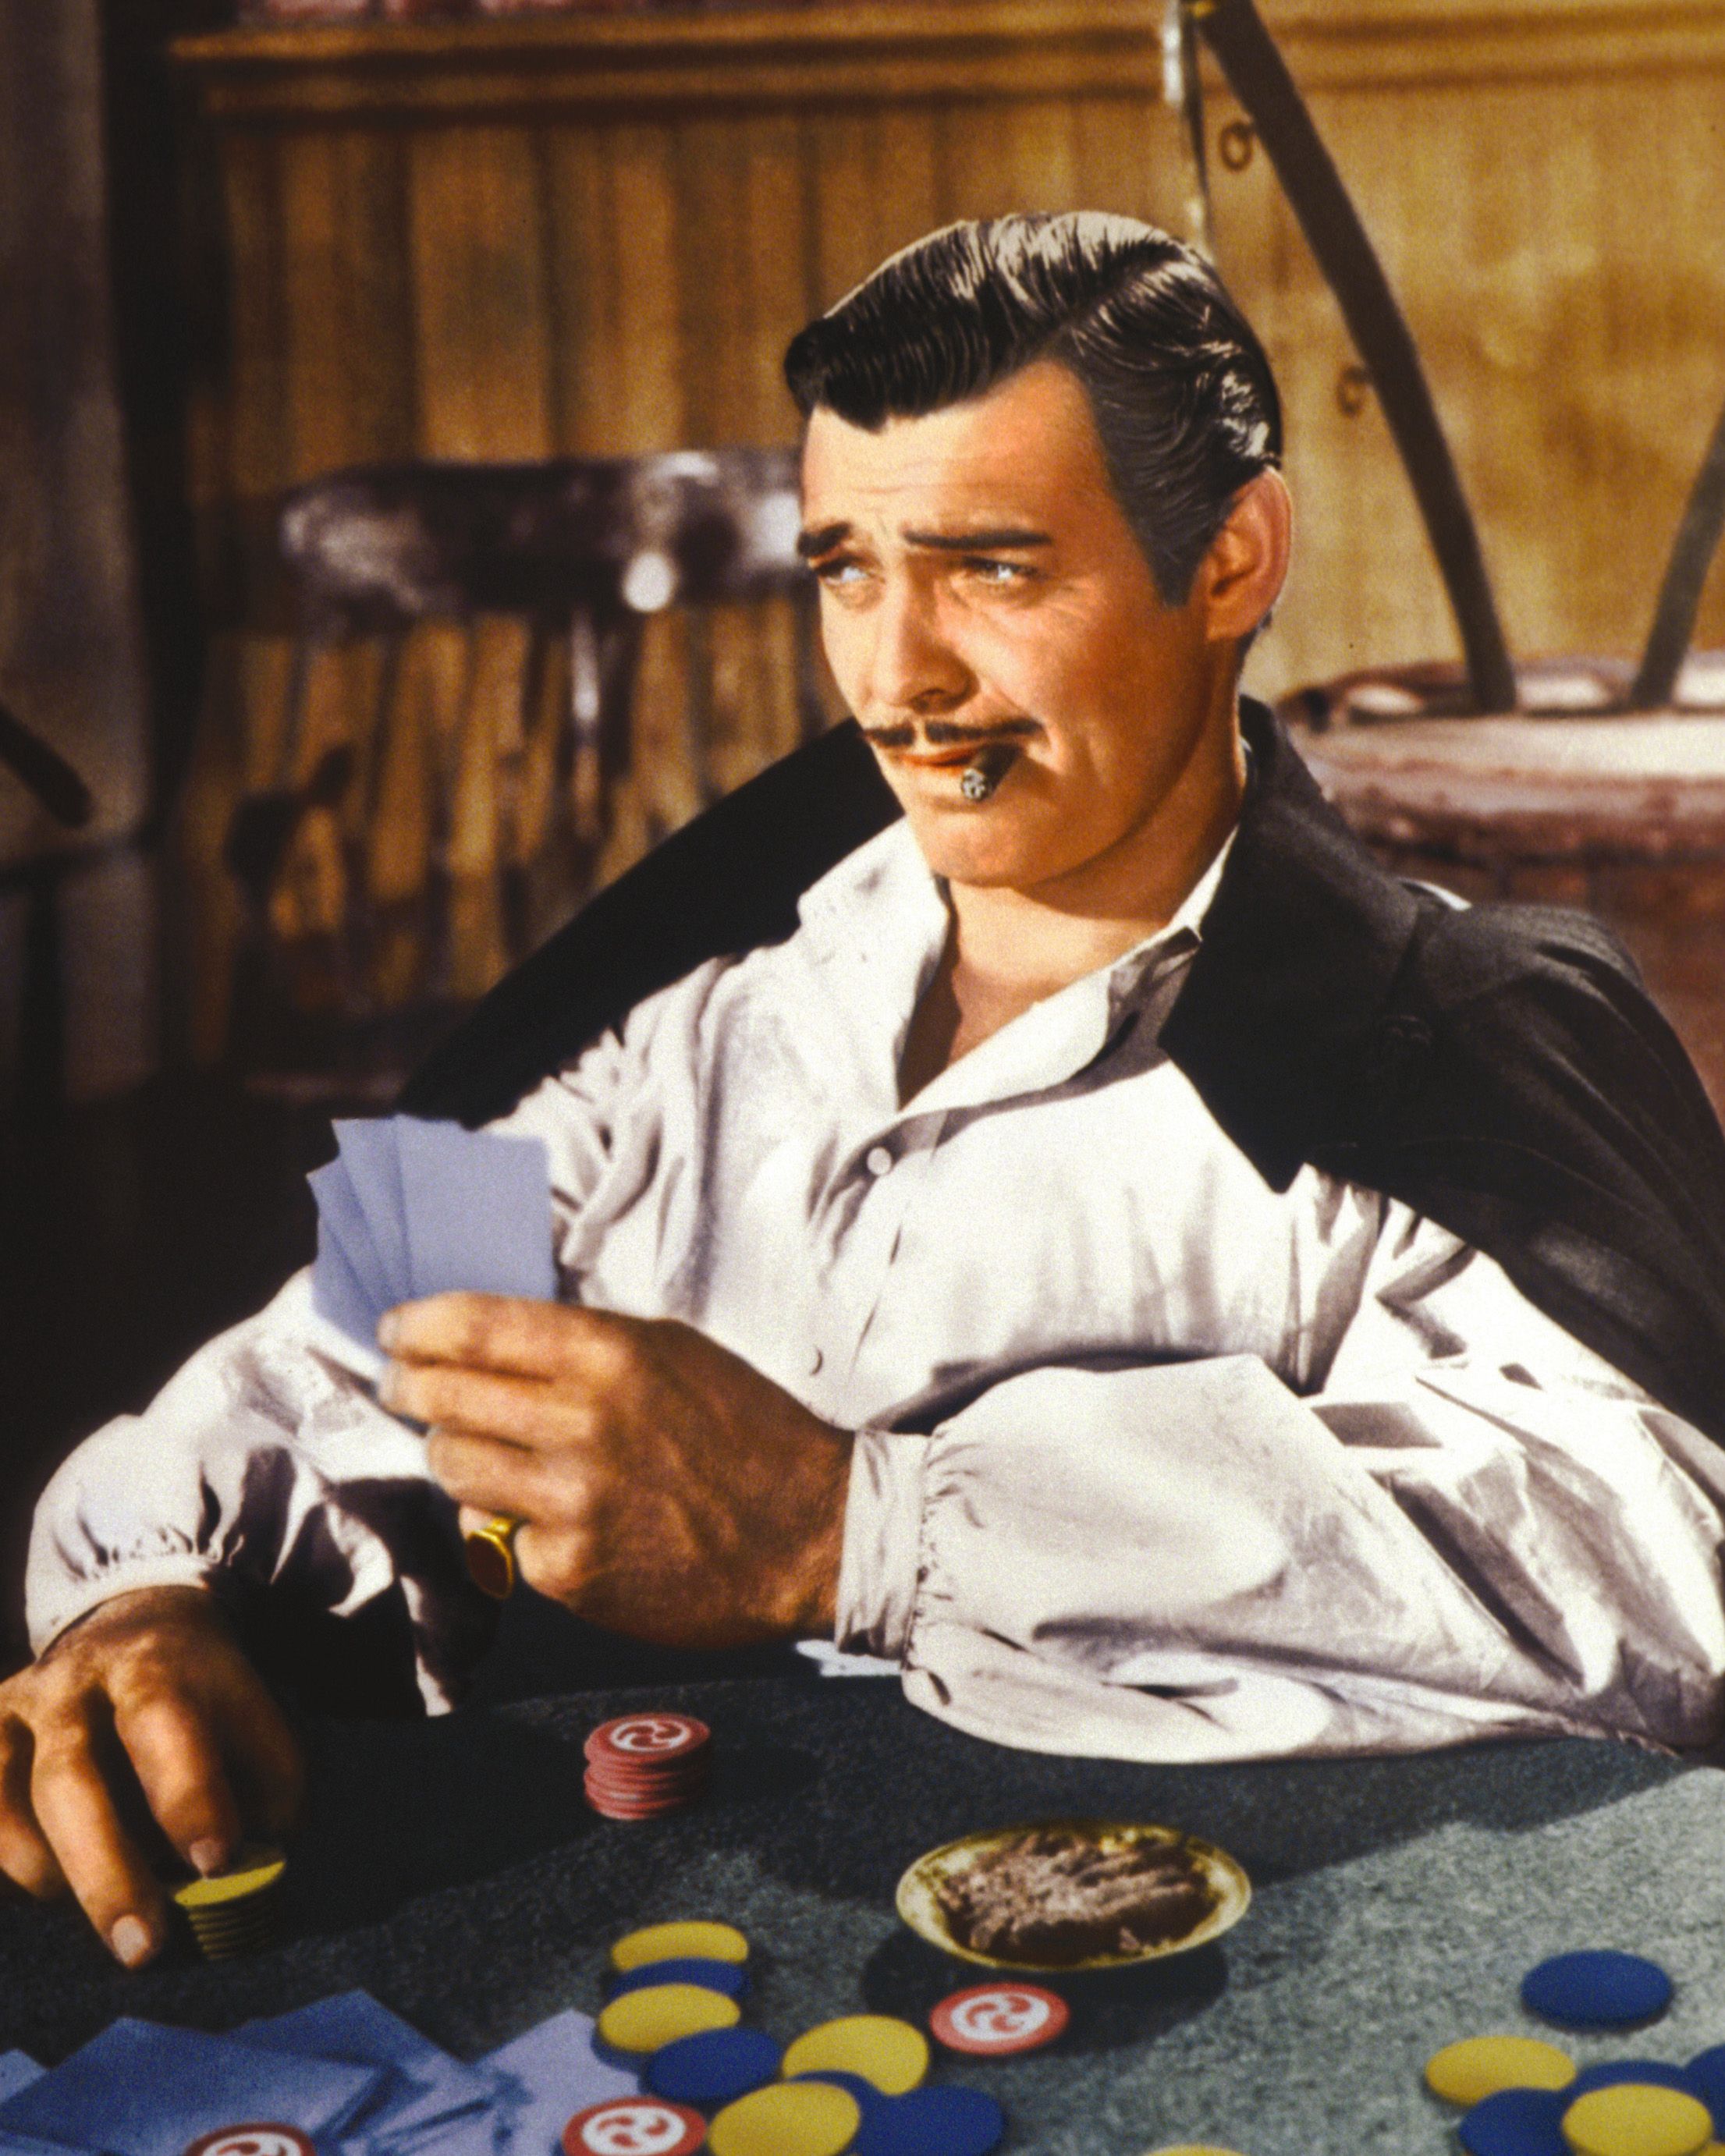 Clark Gable playing cards and smoking a cigar in a publicity still issued for the film "Gone With The Wind," 1939. | Source: Getty Images